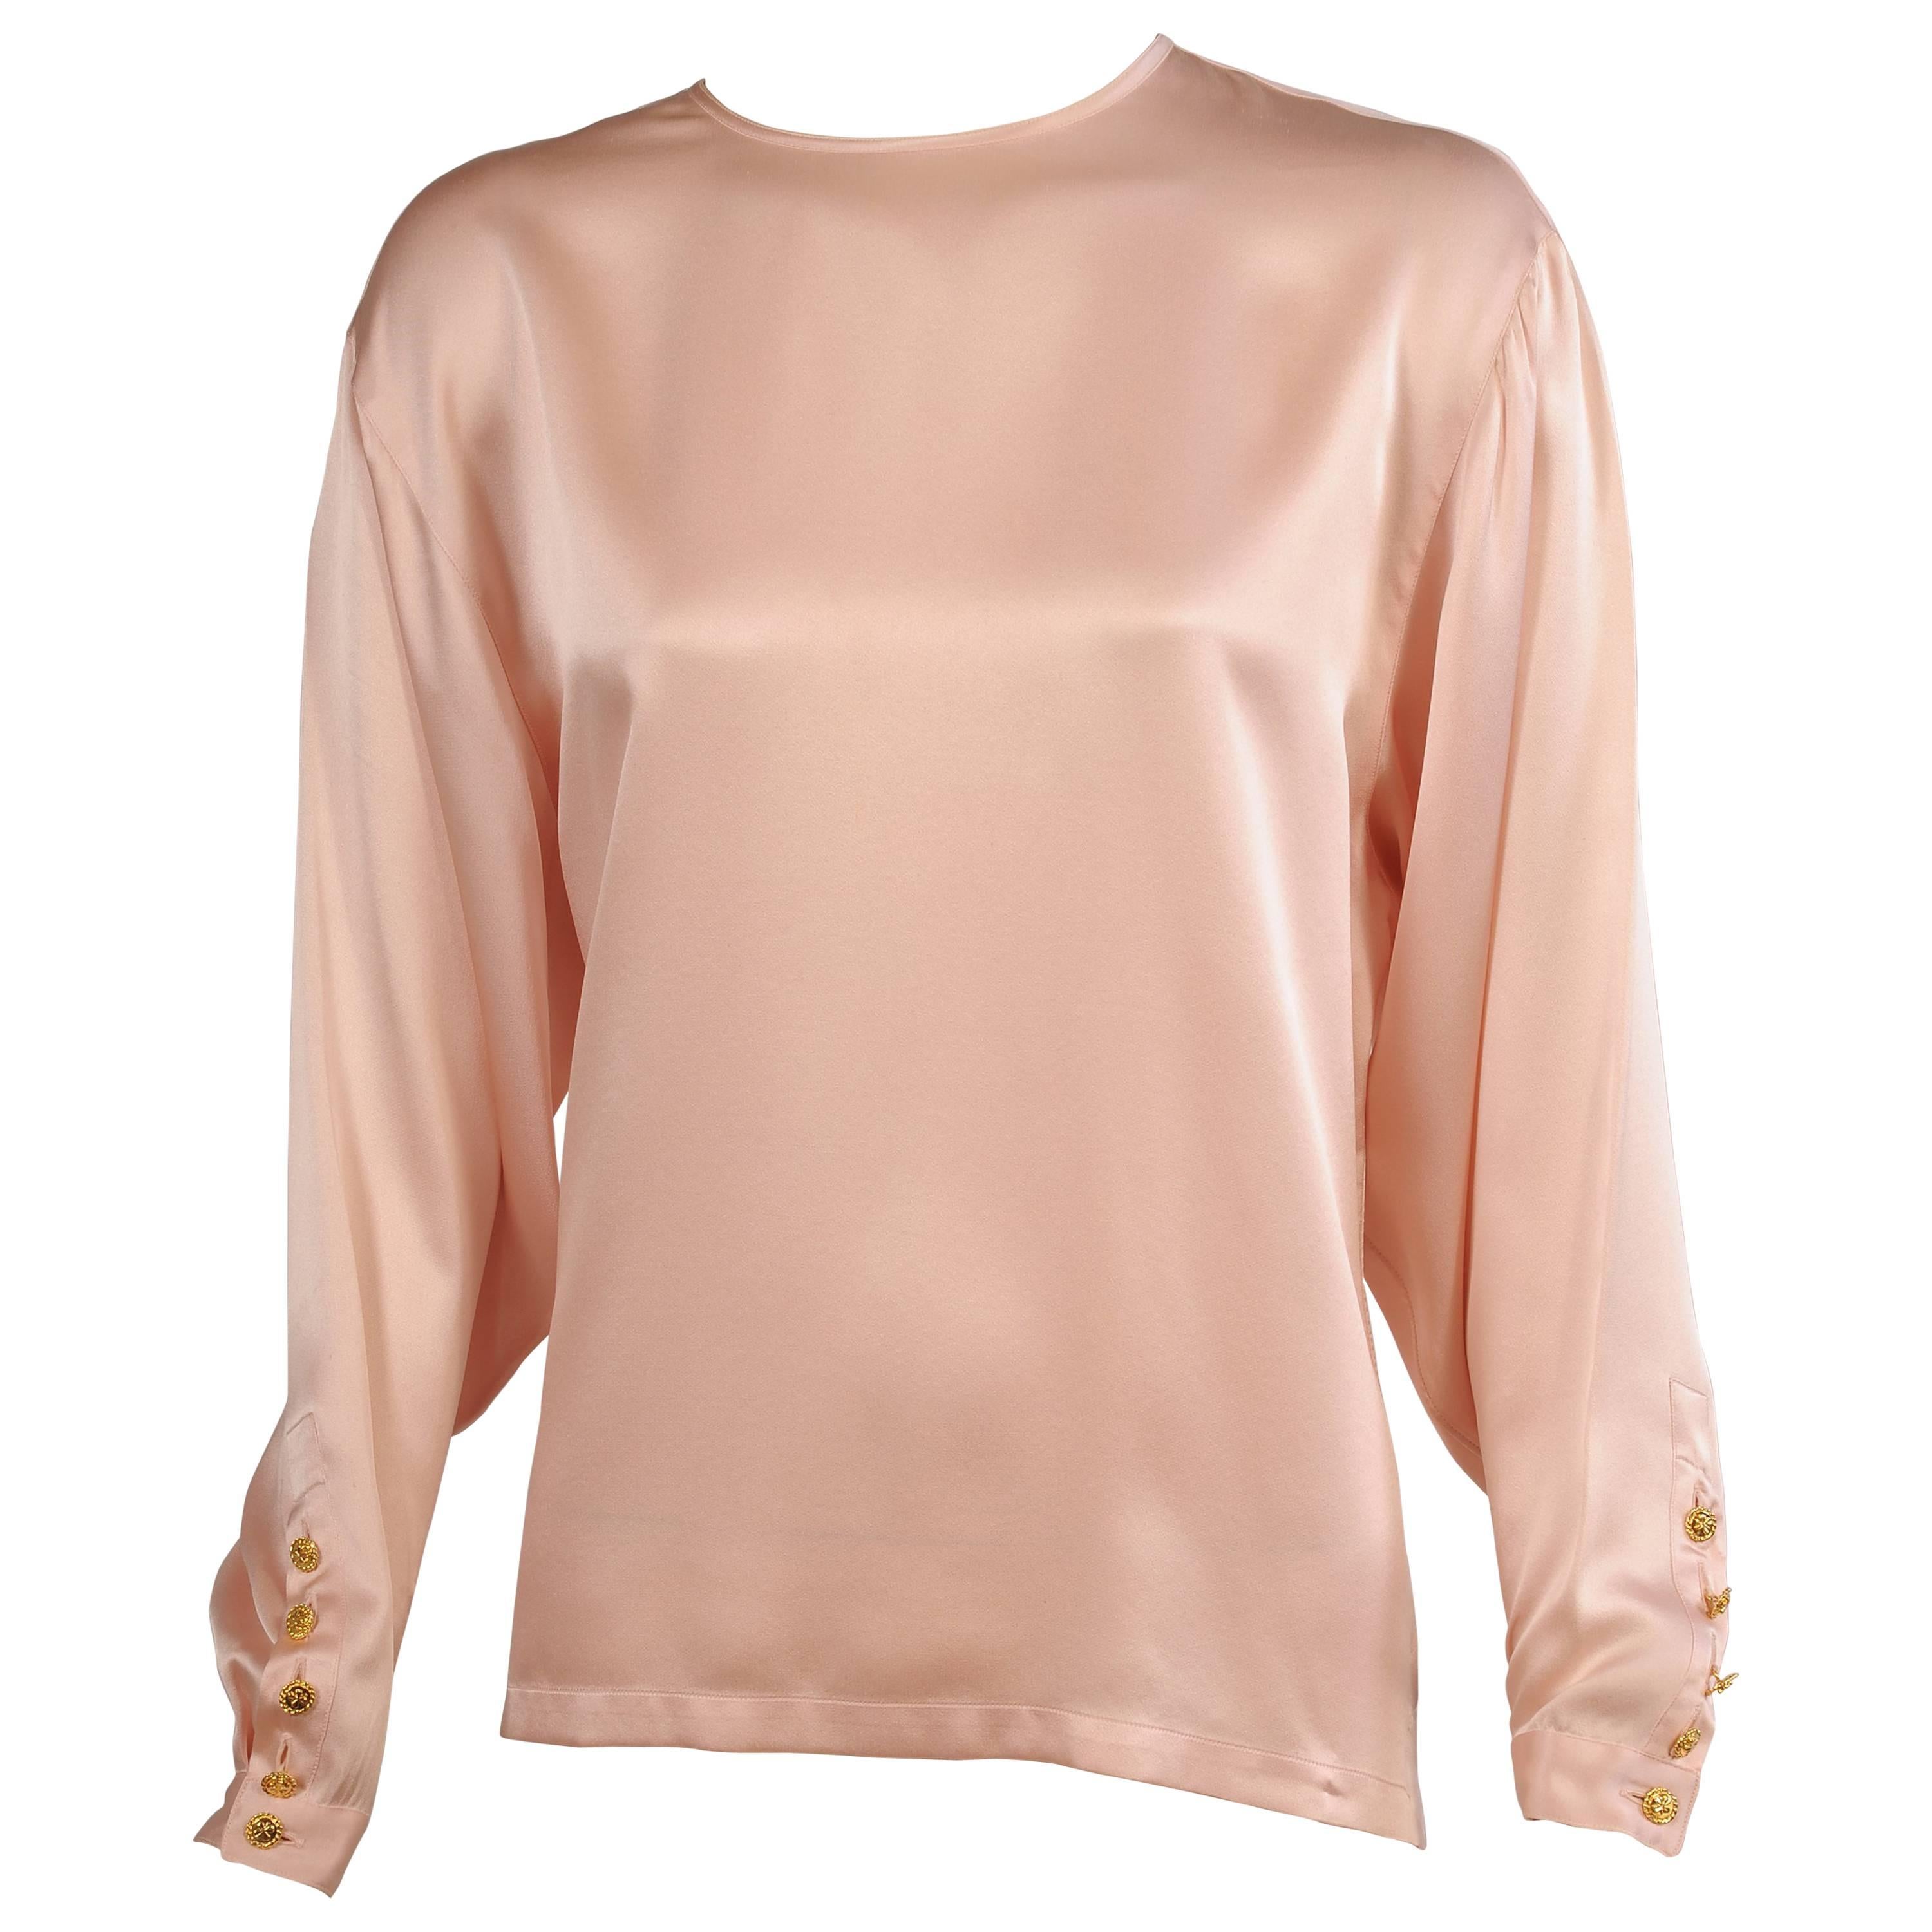 Chanel Pale Pink Silk Charmeuse Blouse, Larger Size